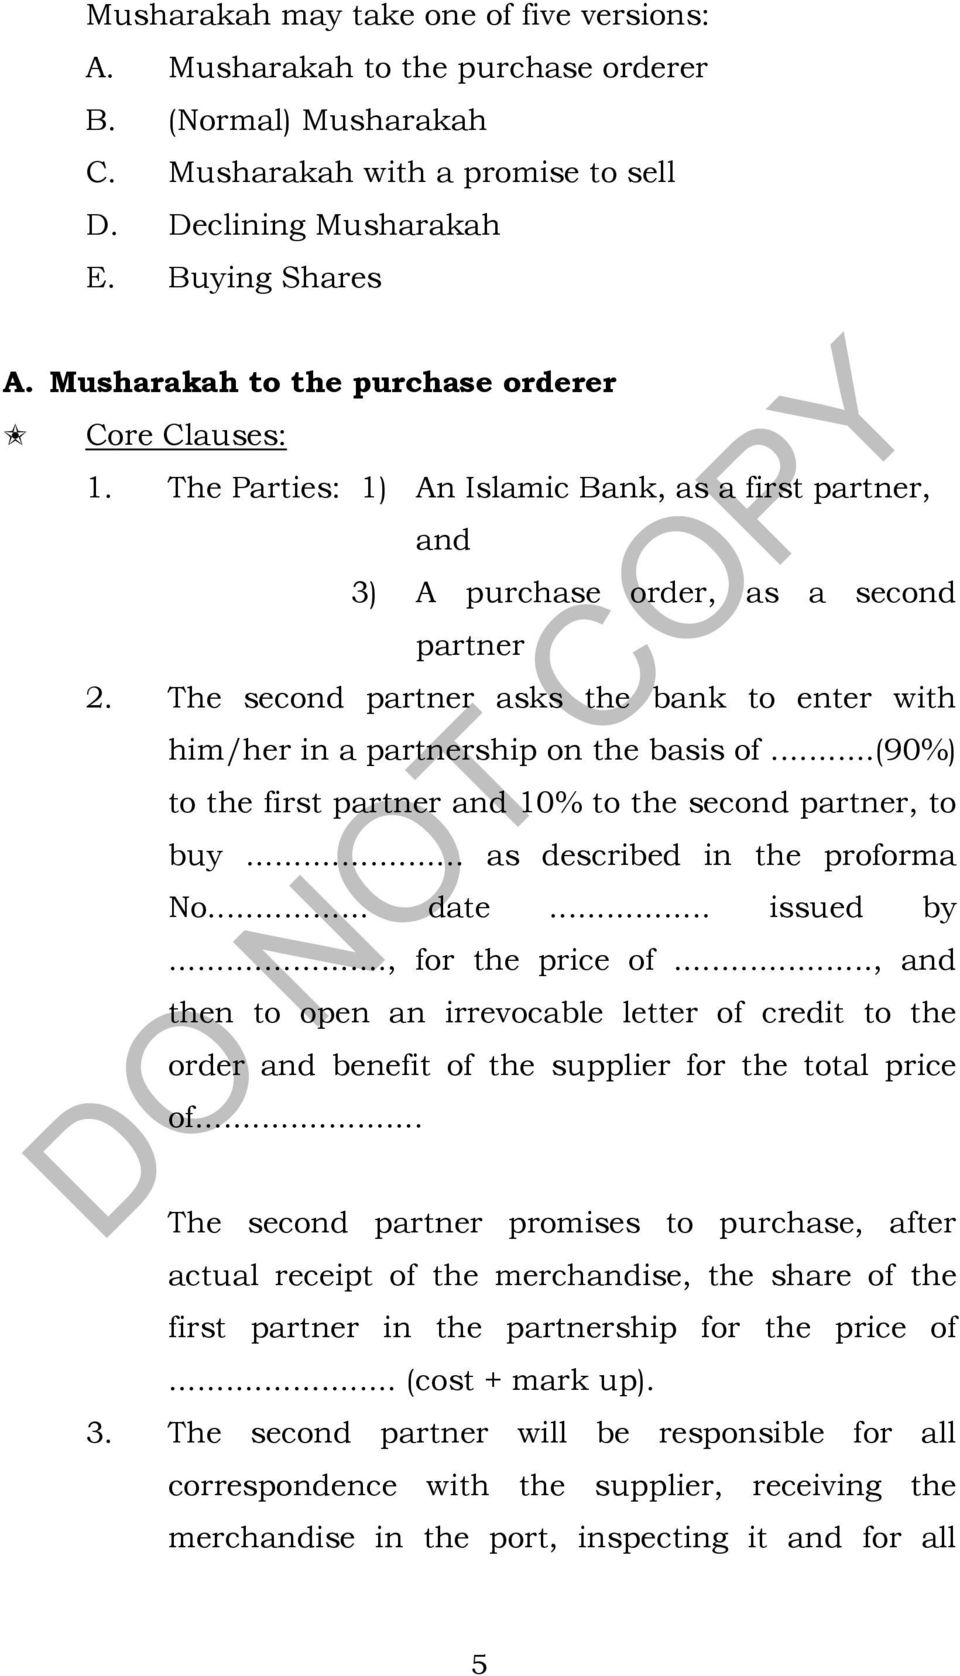 The second partner asks the bank to enter with him/her in a partnership on the basis of...(90%) to the first partner and 10% to the second partner, to buy... as described in the proforma No... date.